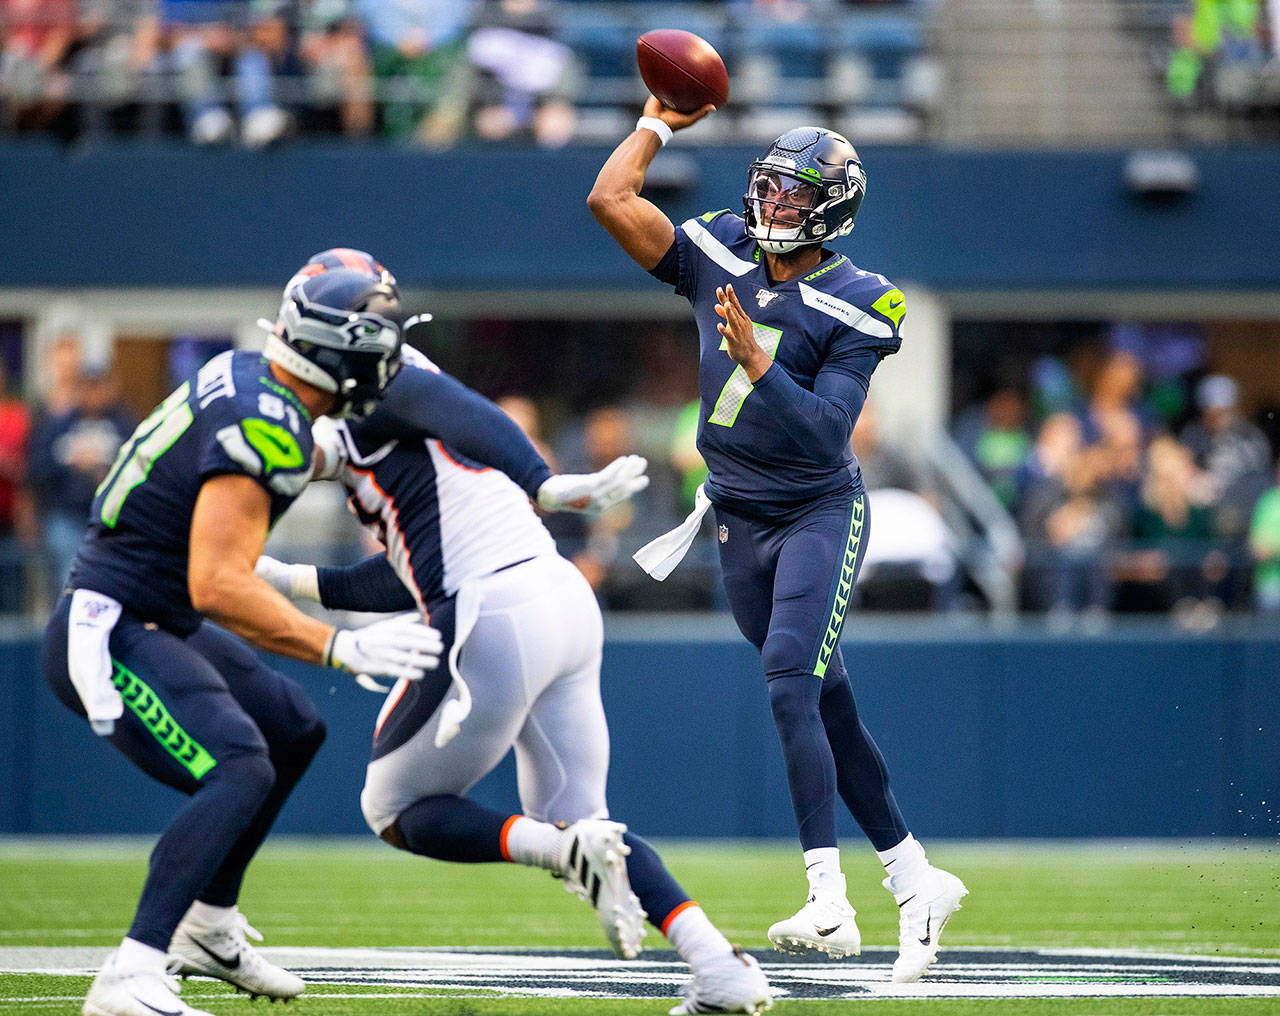 Seattle Seahawks quarterback Geno Smith (7) gets enough protection to throw a first-quarter pass against the Denver Broncos during a preseason game at Century Link Field in Seattle on Thursday, Aug. 8, 2019. (Dean Rutz/Seattle Times/TNS)